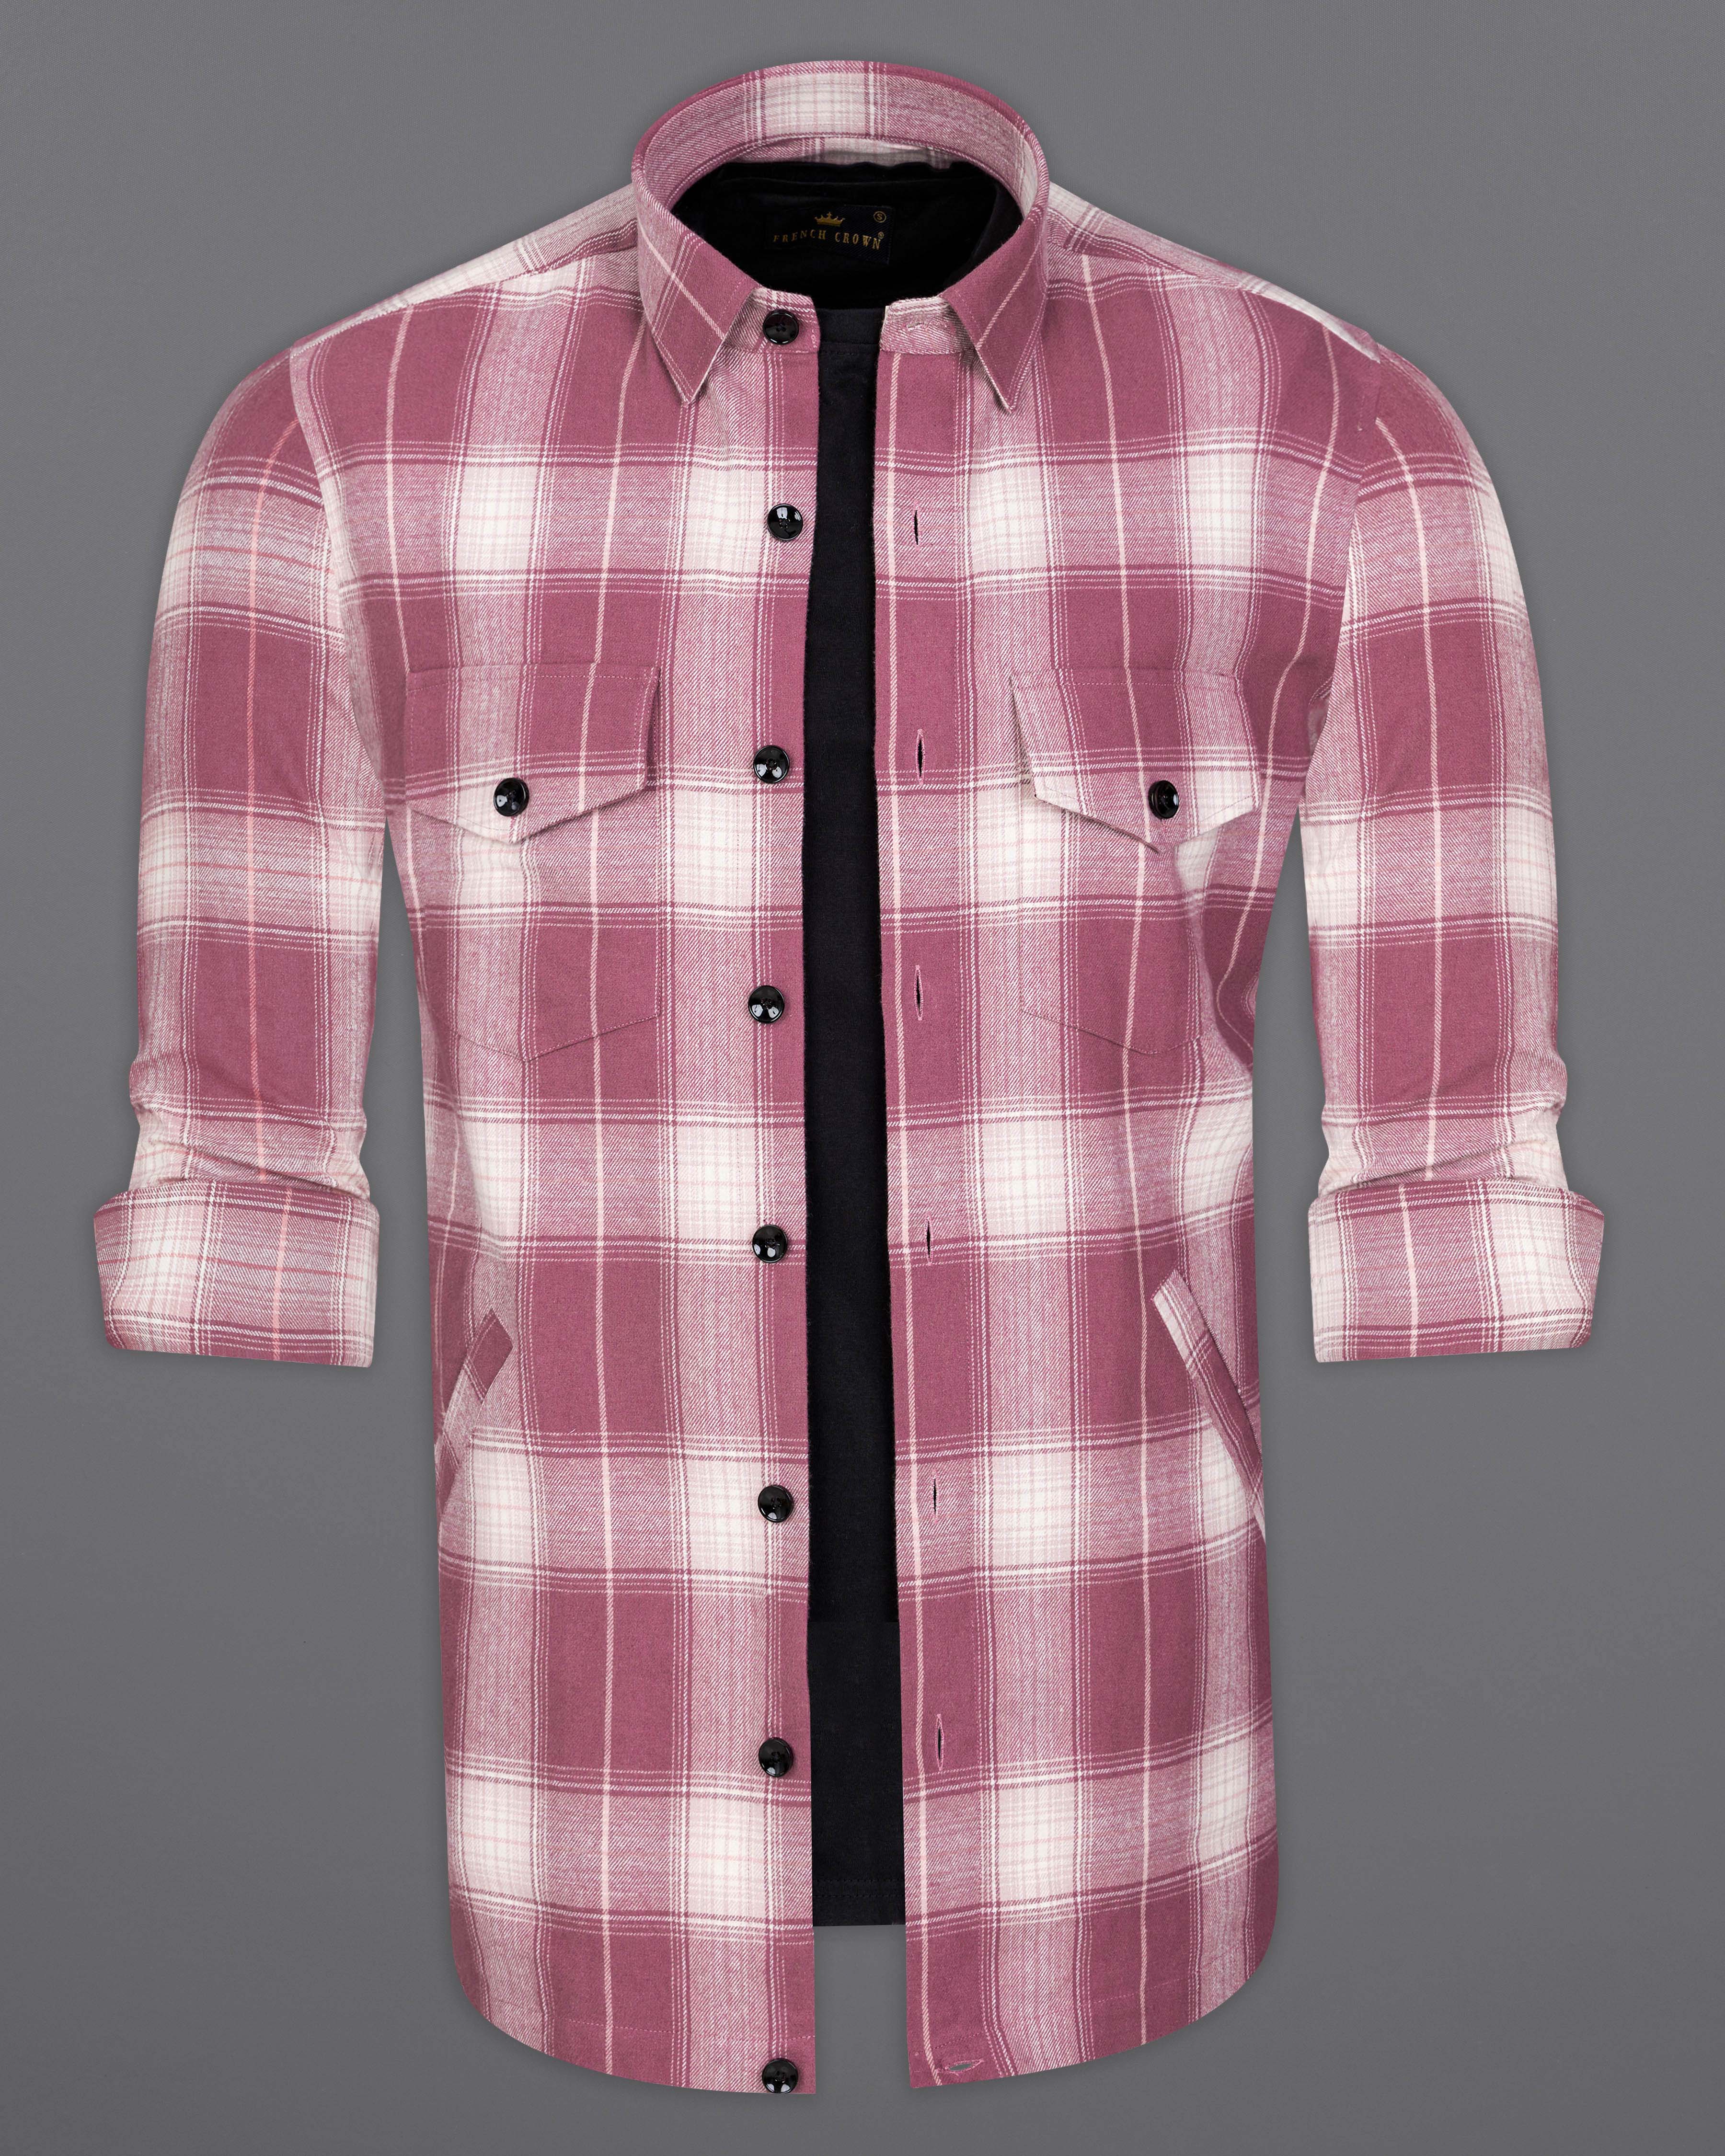 Taupe Pink and Gainsboro Cream Plaid Flannel Overshirt 9545-OS-FP-P301-38, 9545-OS-FP-P301-H-38, 9545-OS-FP-P301-39, 9545-OS-FP-P301-H-39, 9545-OS-FP-P301-40, 9545-OS-FP-P301-H-40, 9545-OS-FP-P301-42, 9545-OS-FP-P301-H-42, 9545-OS-FP-P301-44, 9545-OS-FP-P301-H-44, 9545-OS-FP-P301-46, 9545-OS-FP-P301-H-46, 9545-OS-FP-P301-48, 9545-OS-FP-P301-H-48, 9545-OS-FP-P301-50, 9545-OS-FP-P301-H-50, 9545-OS-FP-P301-52, 9545-OS-FP-P301-H-52